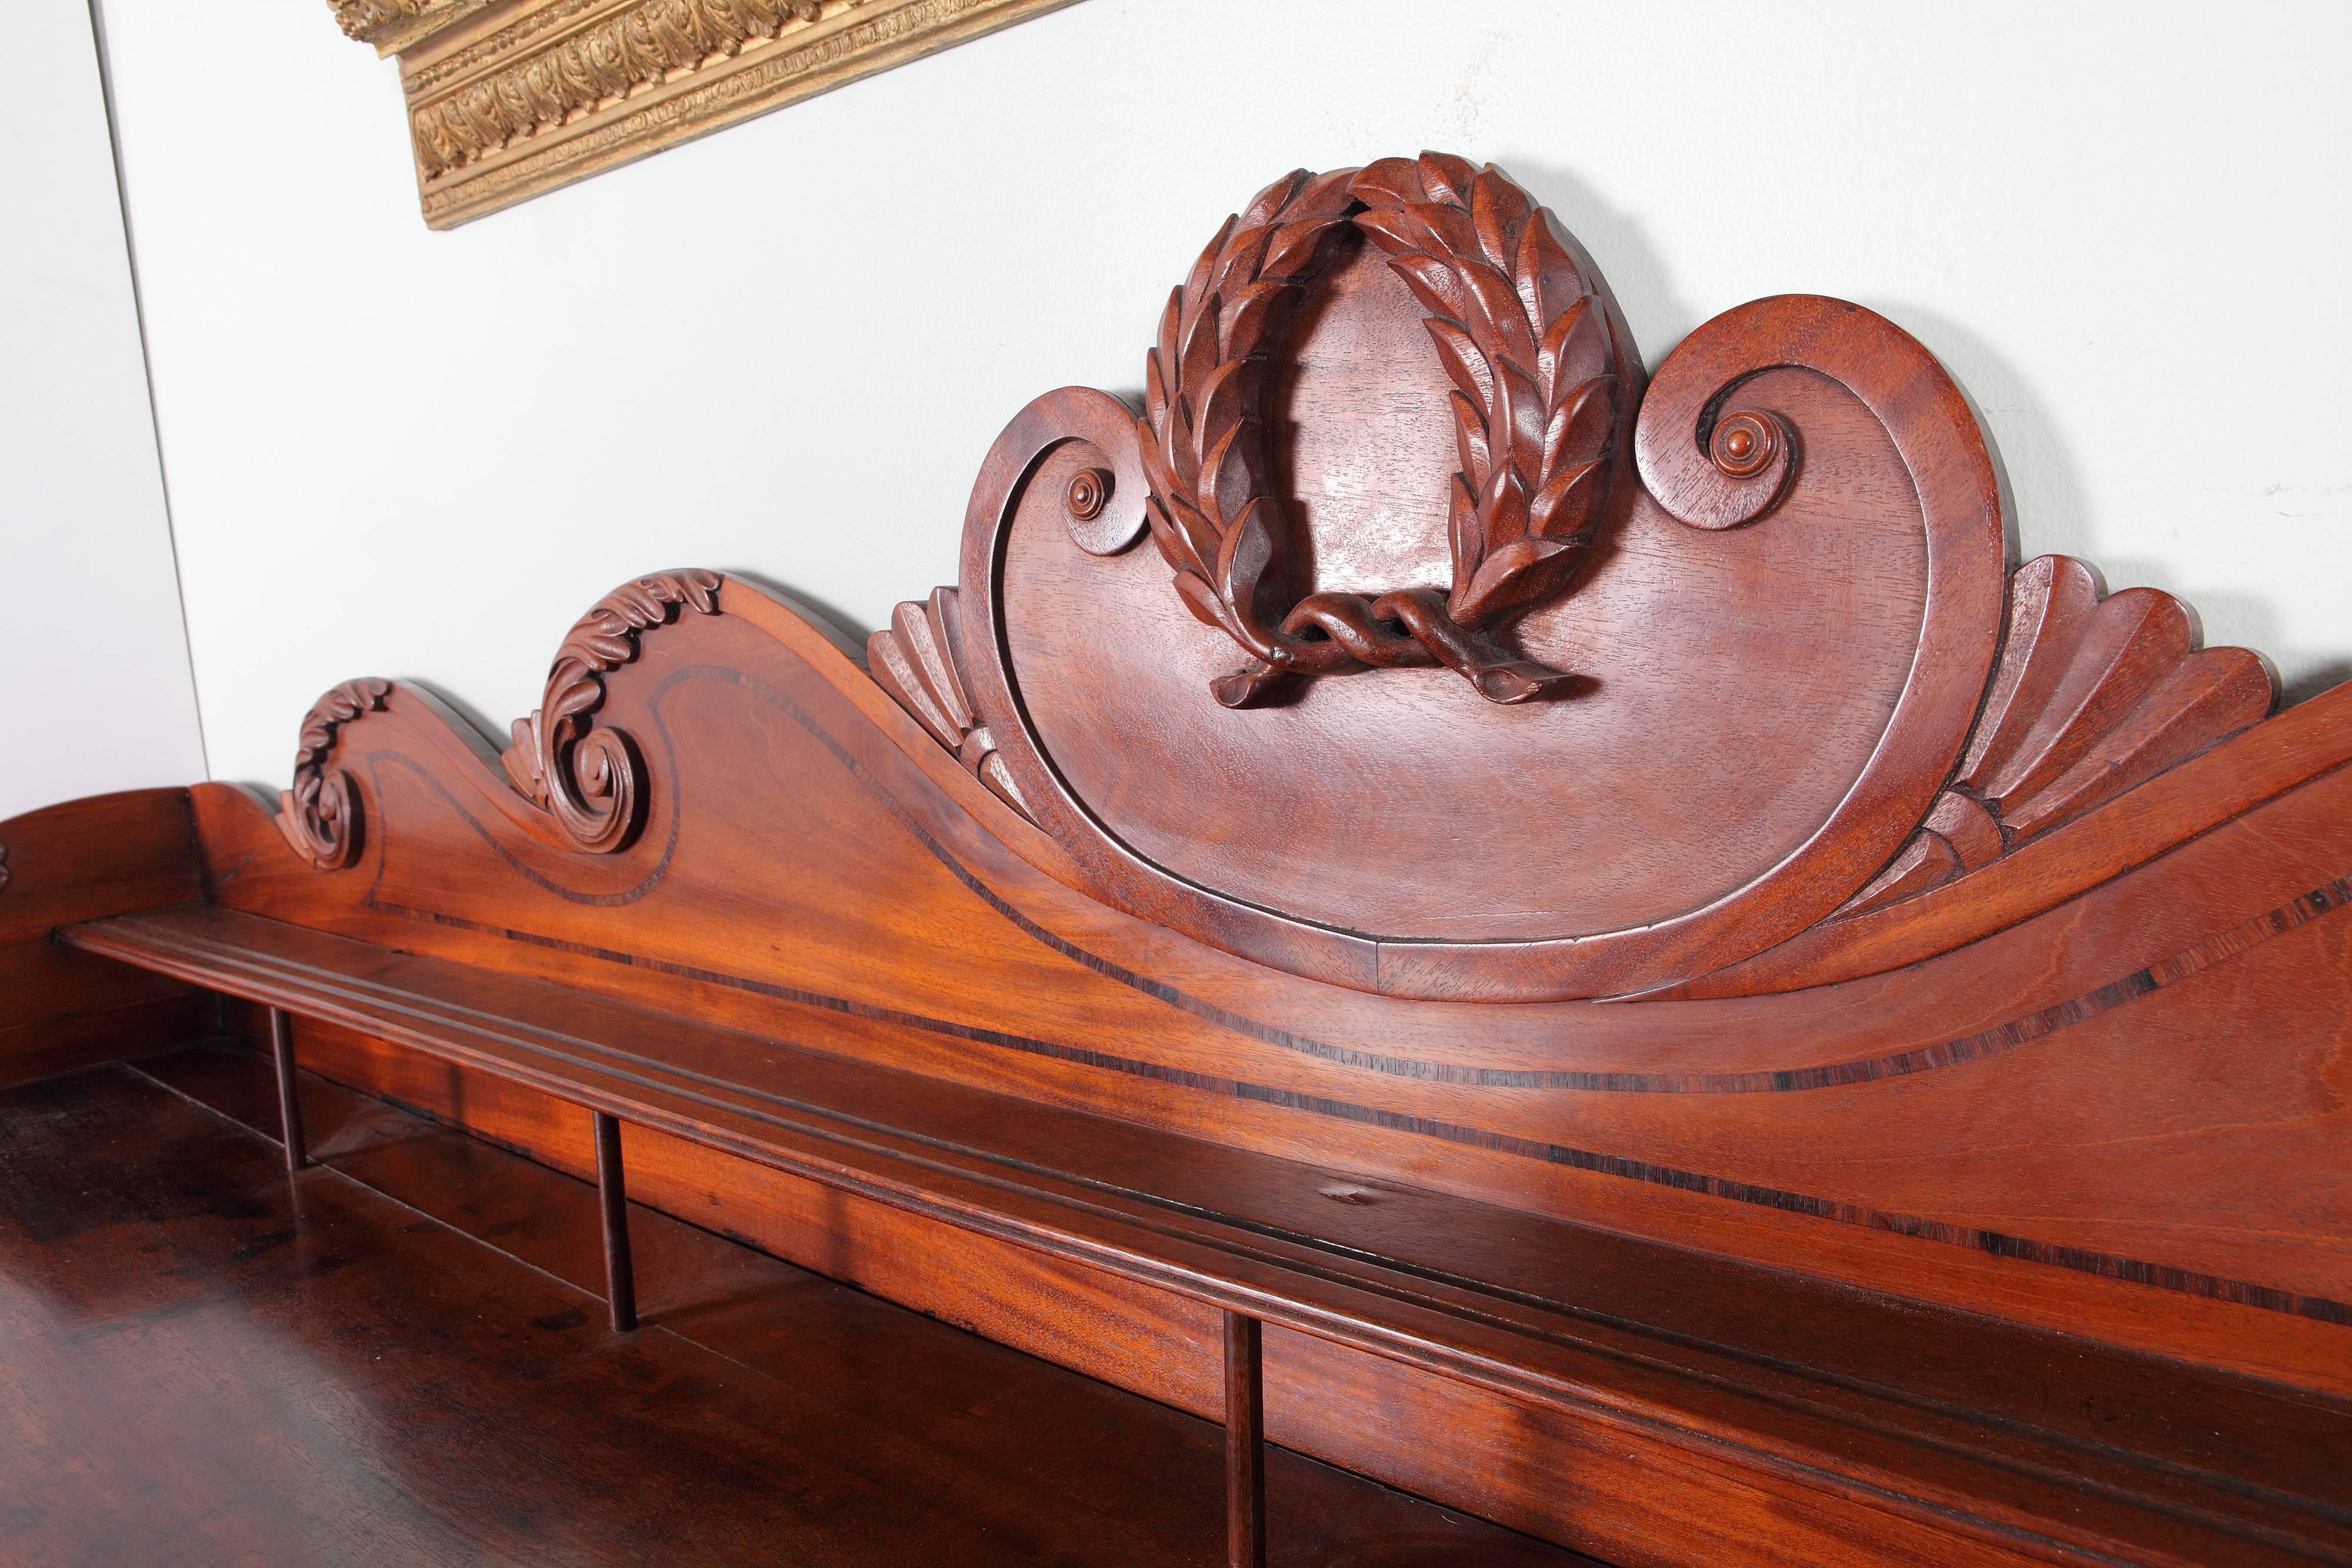 Magnificent large-scale mid-19th century highly carved Irish mahogany sideboard.